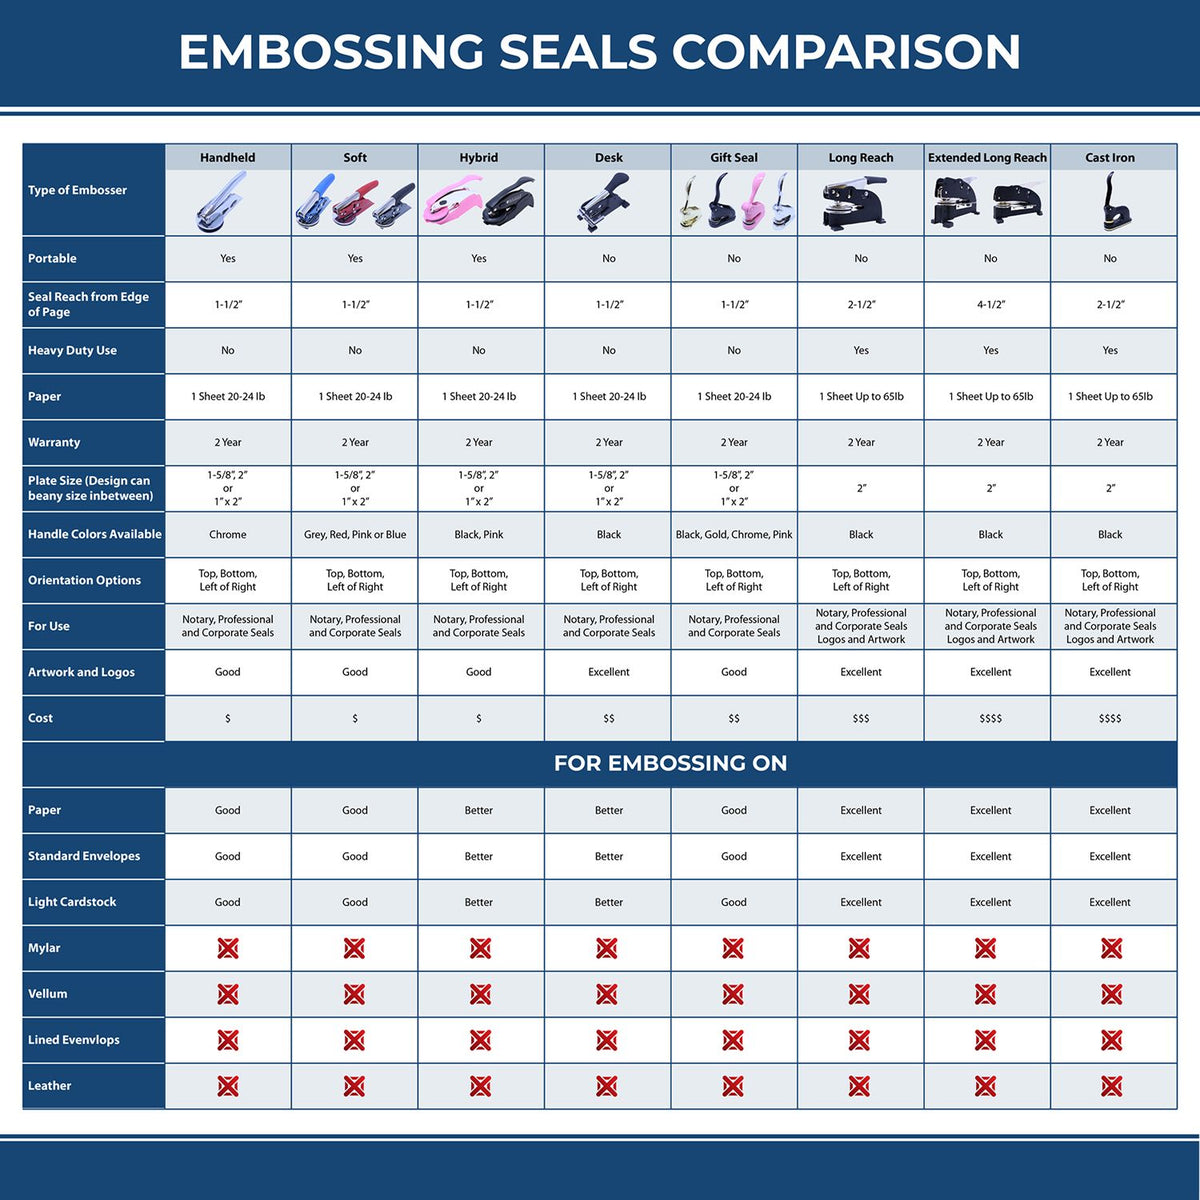 A comparison chart for the different types of mount models available for the Heavy Duty Cast Iron Ohio Engineer Seal Embosser.